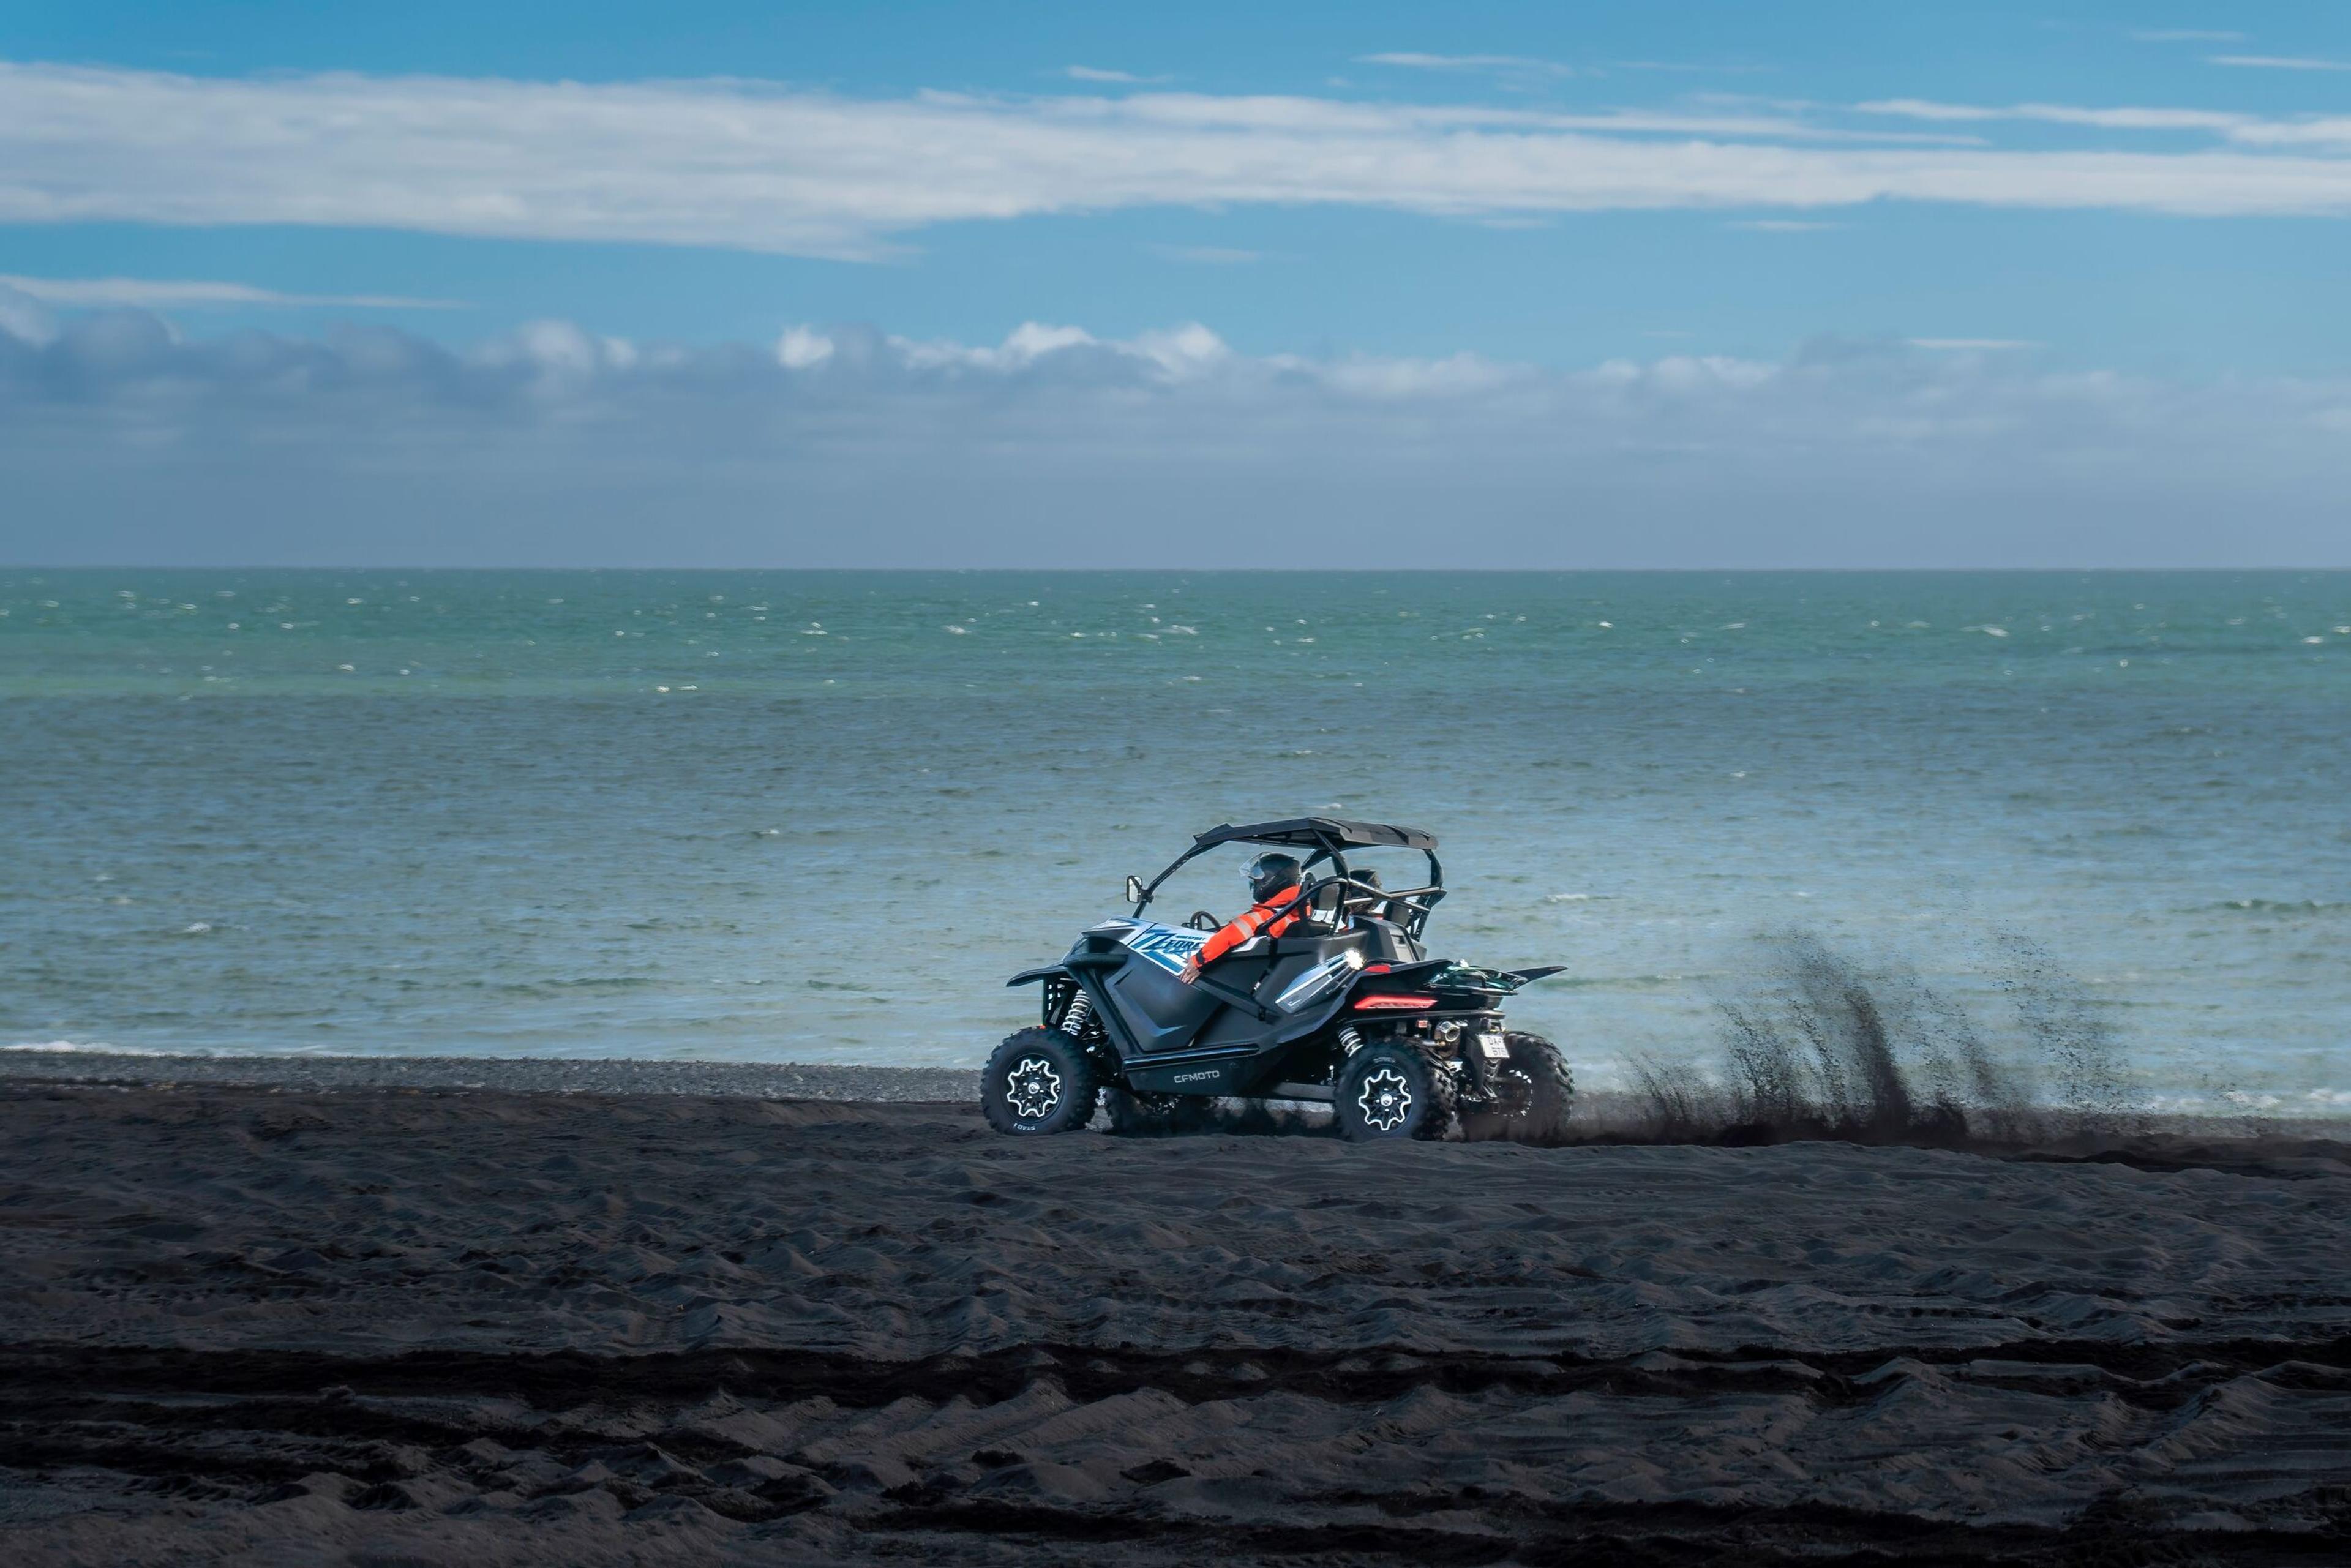 A buggy parked on a black sand beach with the blue ocean in the background under a partly cloudy sky, indicative of a buggy tour in Iceland.